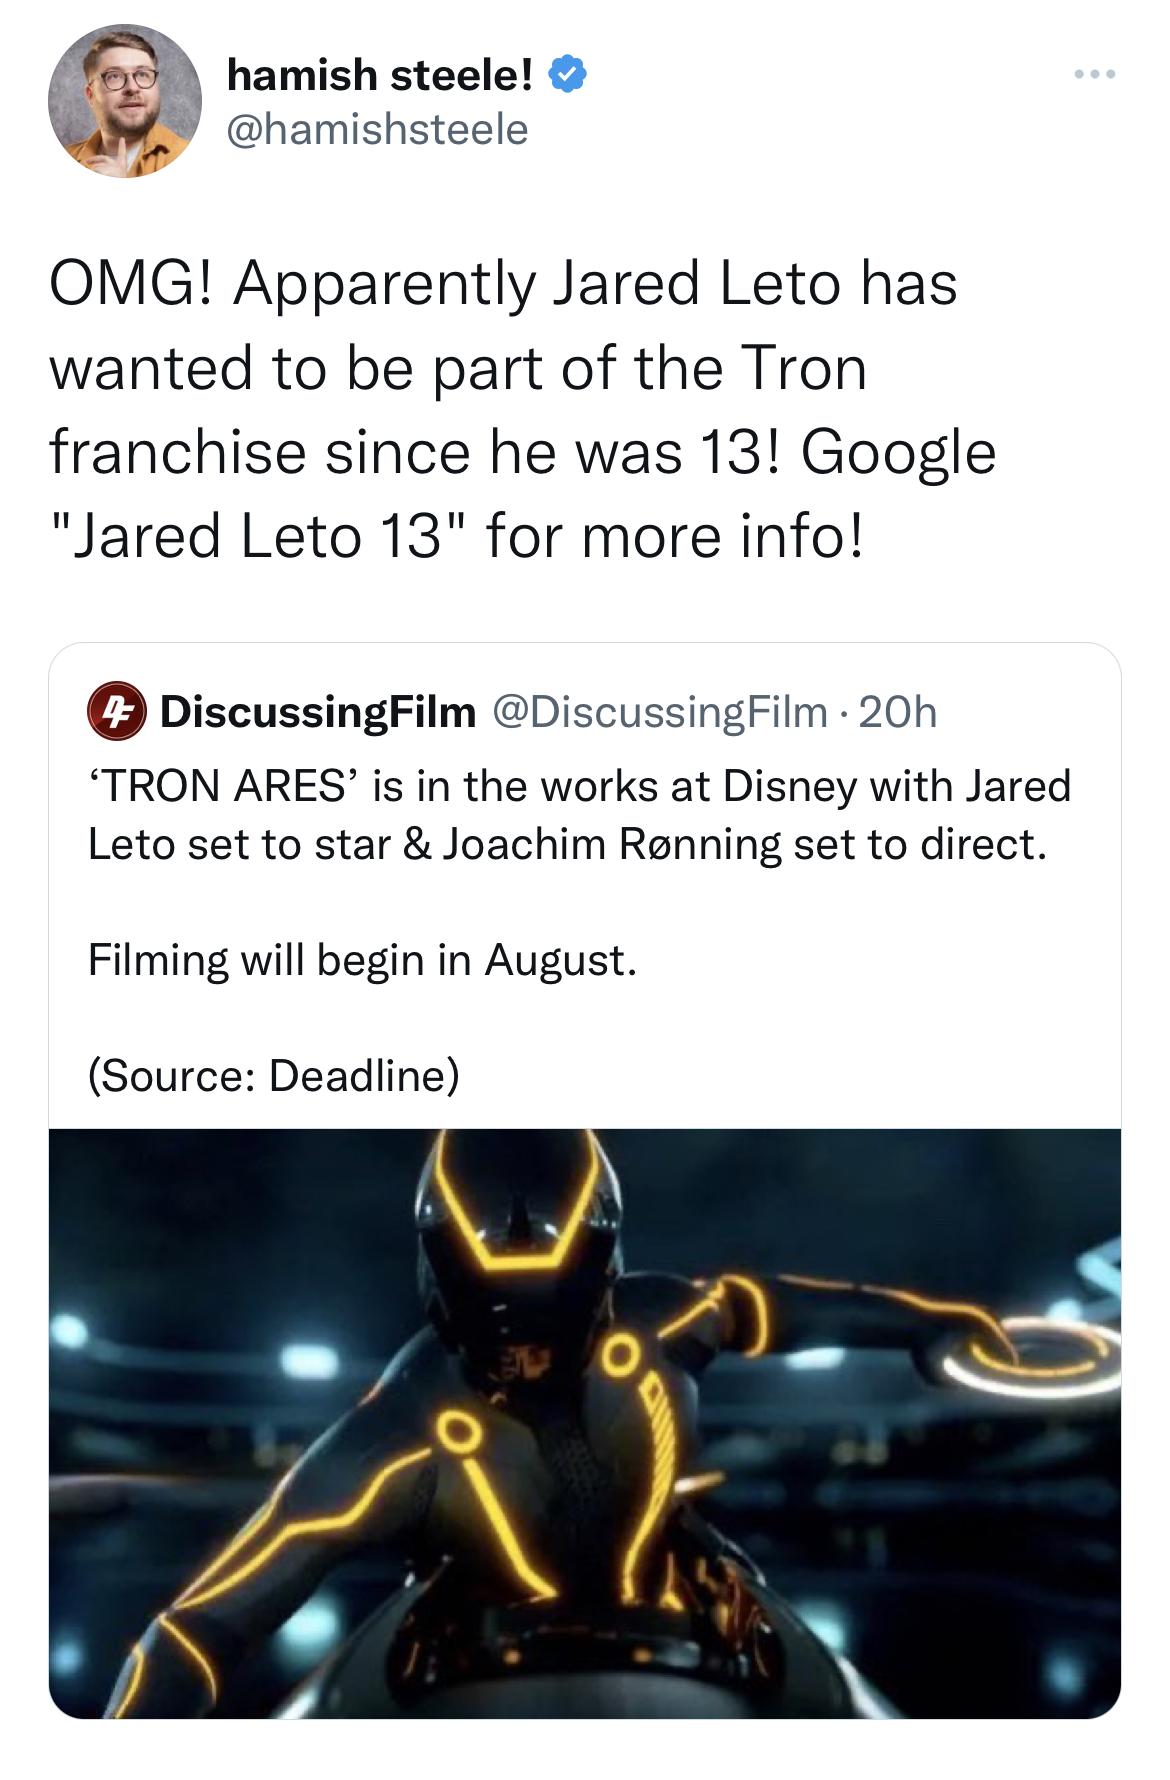 Tweets Dunking on Celebs - screenshot - hamish steele! Omg! Apparently Jared Leto has wanted to be part of the Tron franchise since he was 13! Google "Jared Leto 13" for more info! DiscussingFilm Film 20h Tron Ares' is in the works at Disney with Jared Le